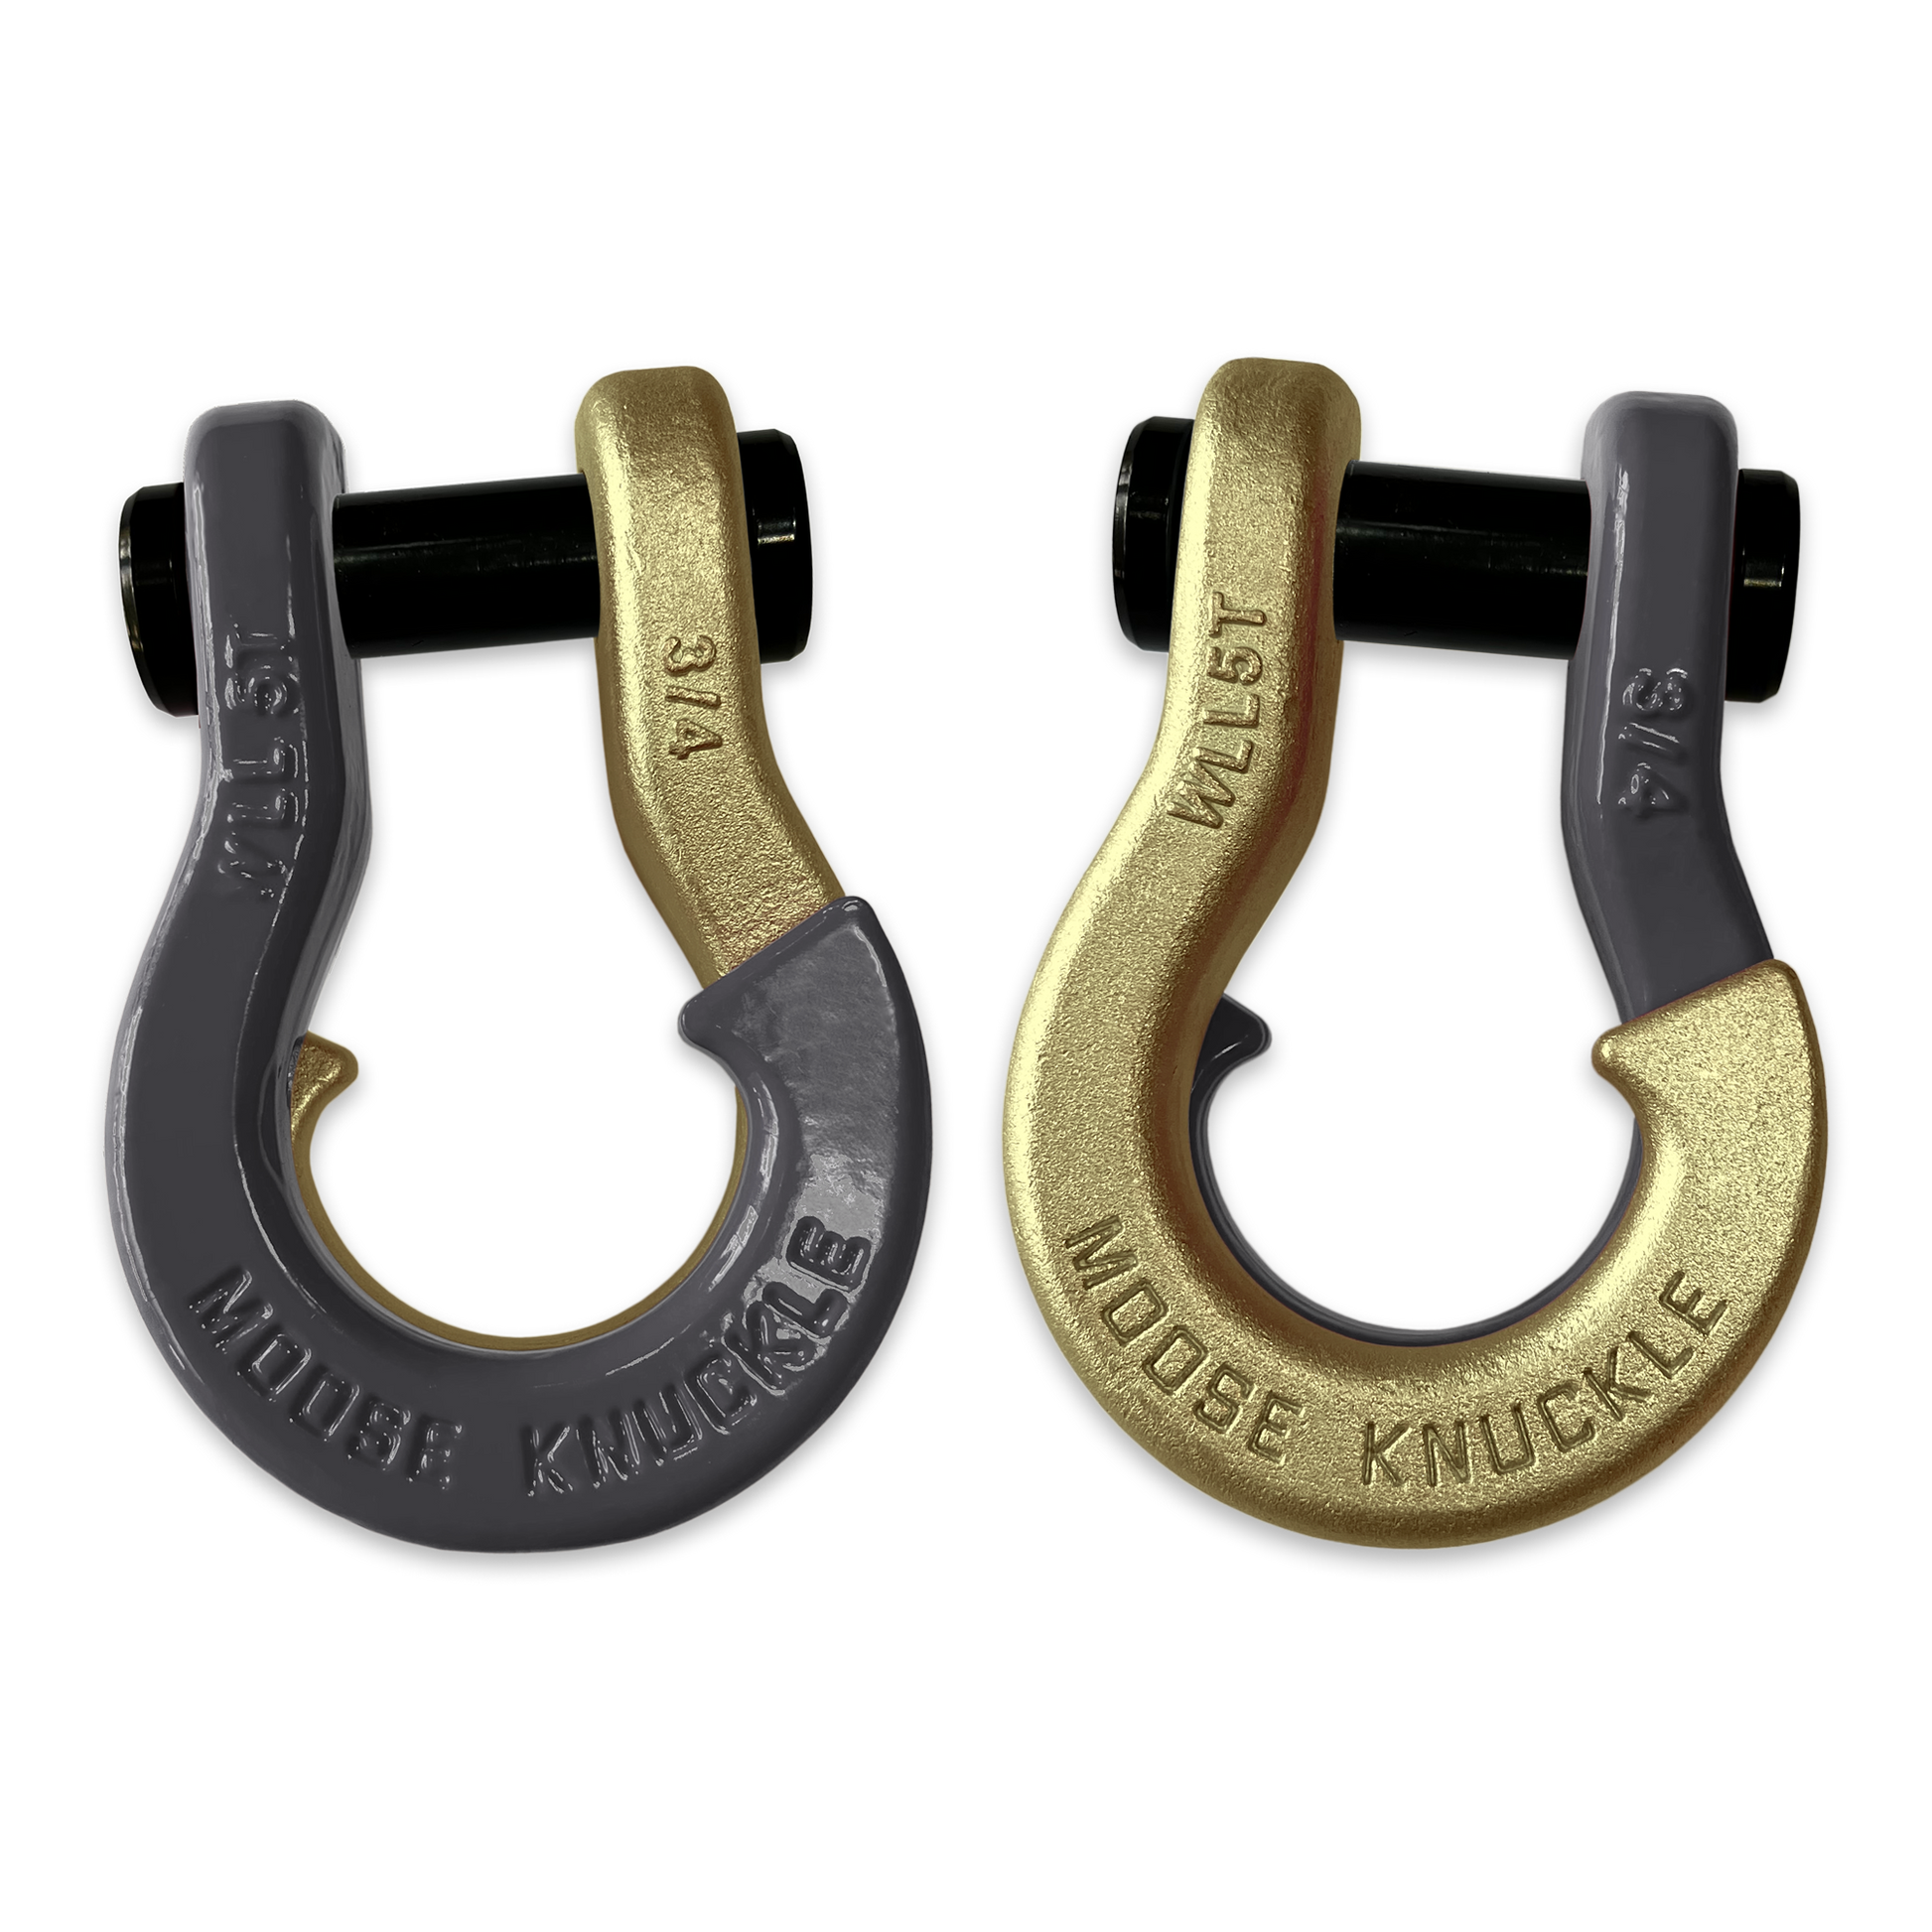 Moose Knuckle's Jowl Recovery Split Shackle 3/4 in Gun Gray and Brass Knuckle Combo